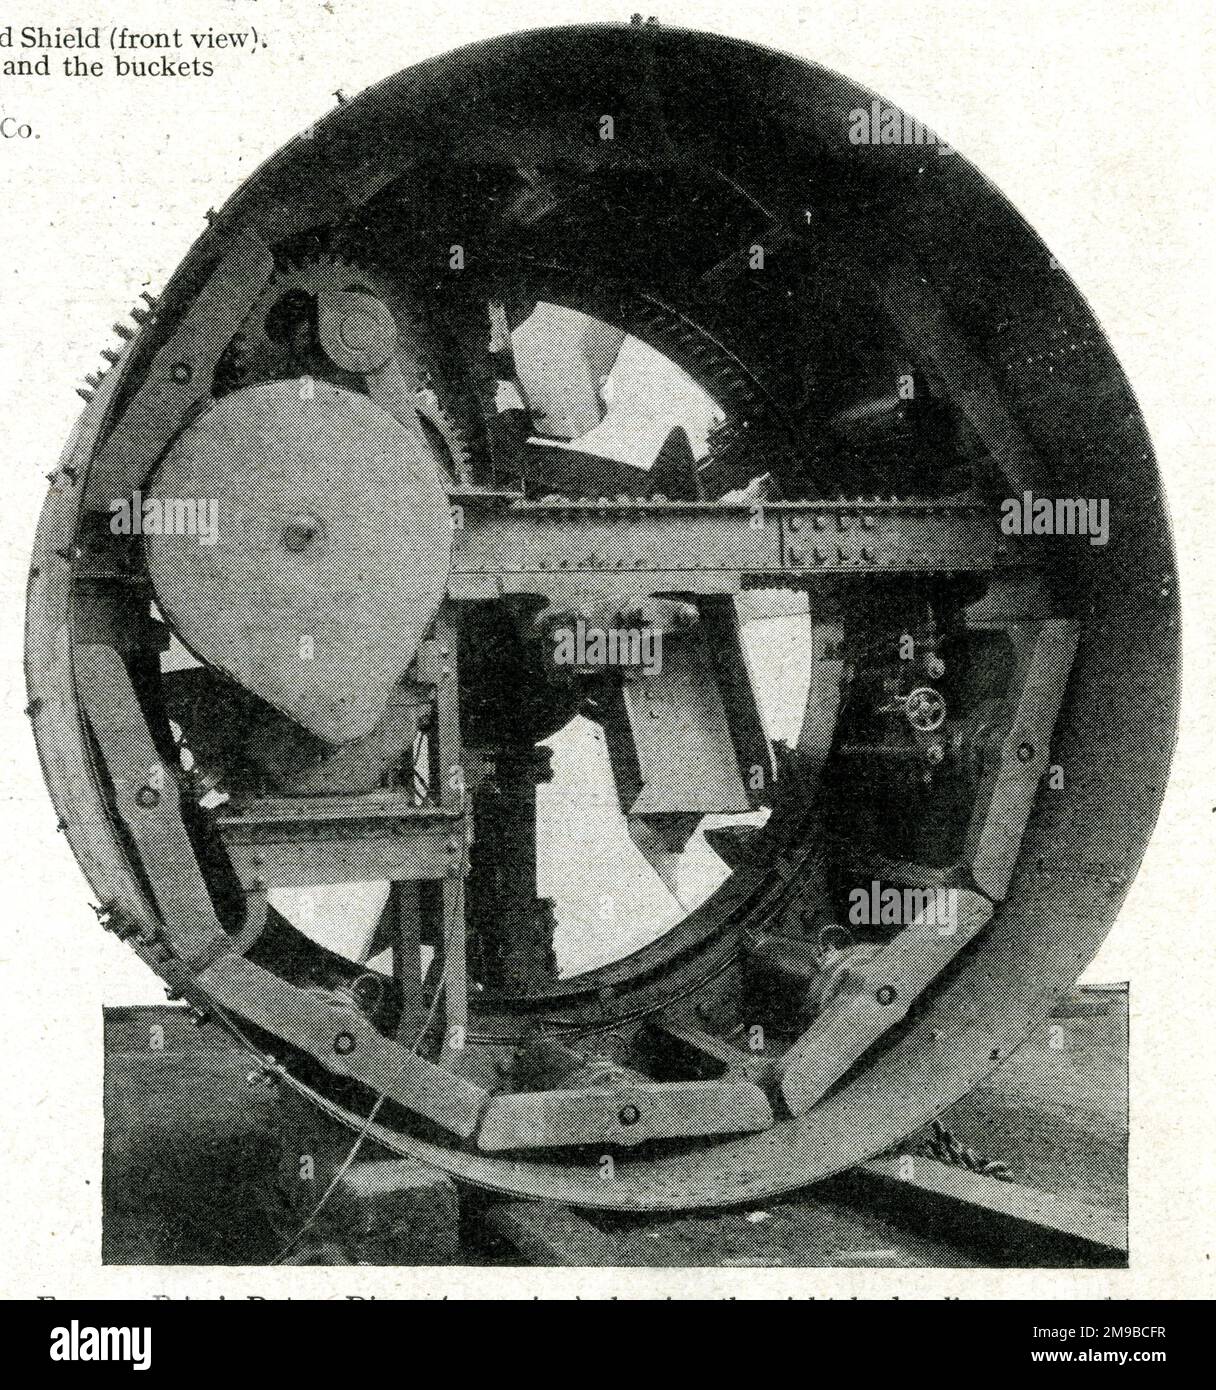 Price's rotary digger for cutting tunnels, showing 8 hydraulic rams used to force the digger forward, casing 12.5 ft diameter Stock Photo